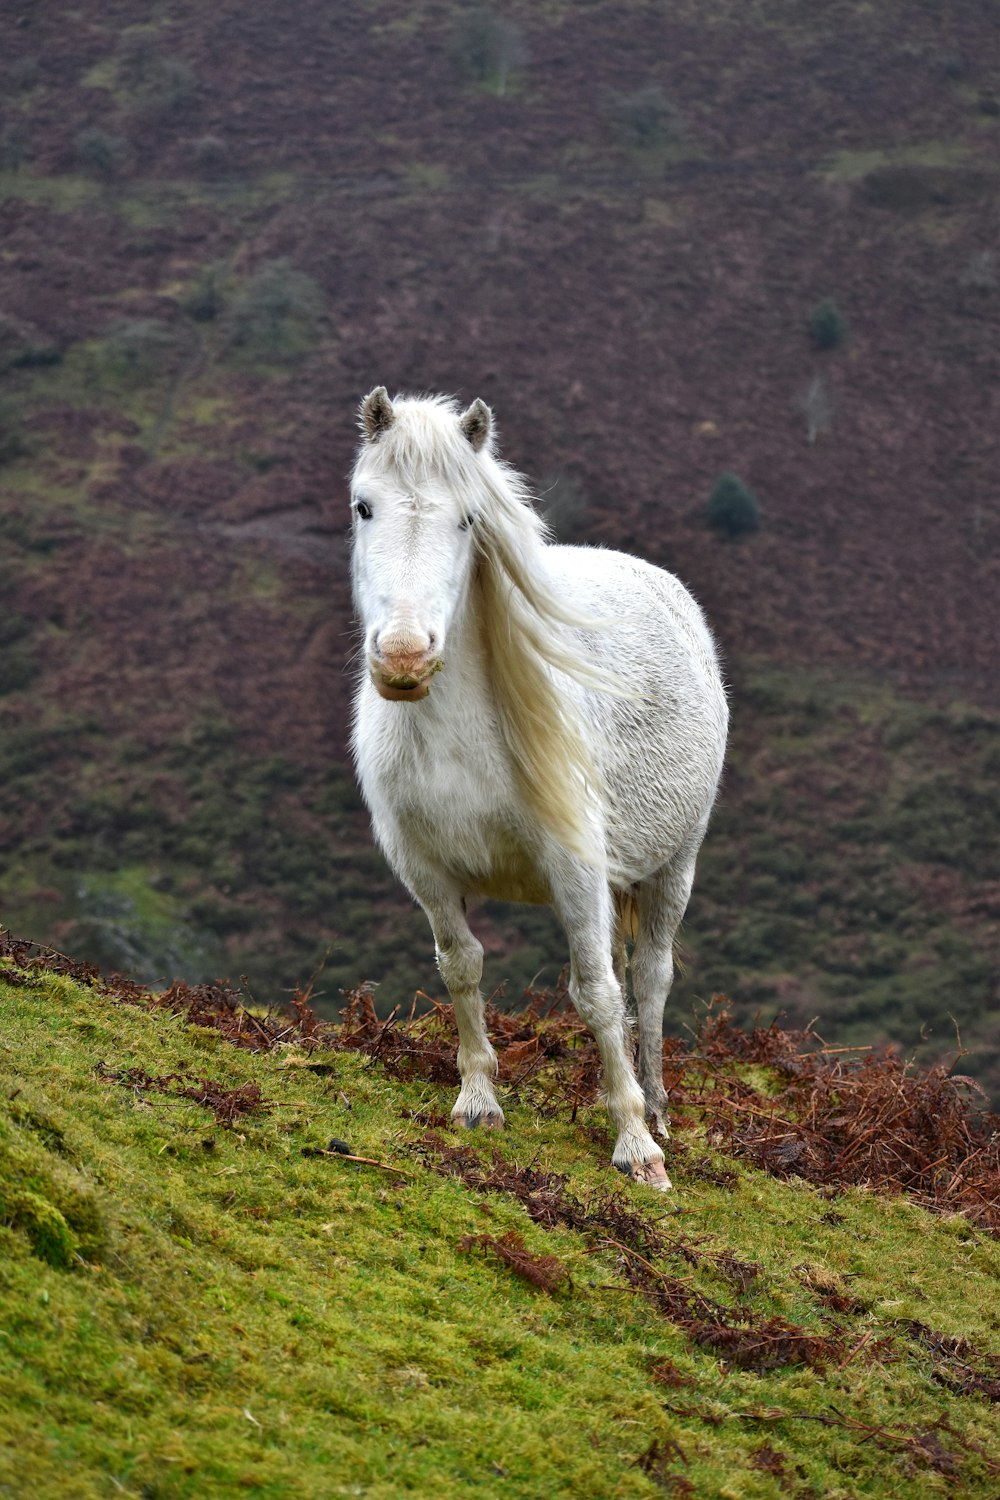 white horse on green grass field during daytime